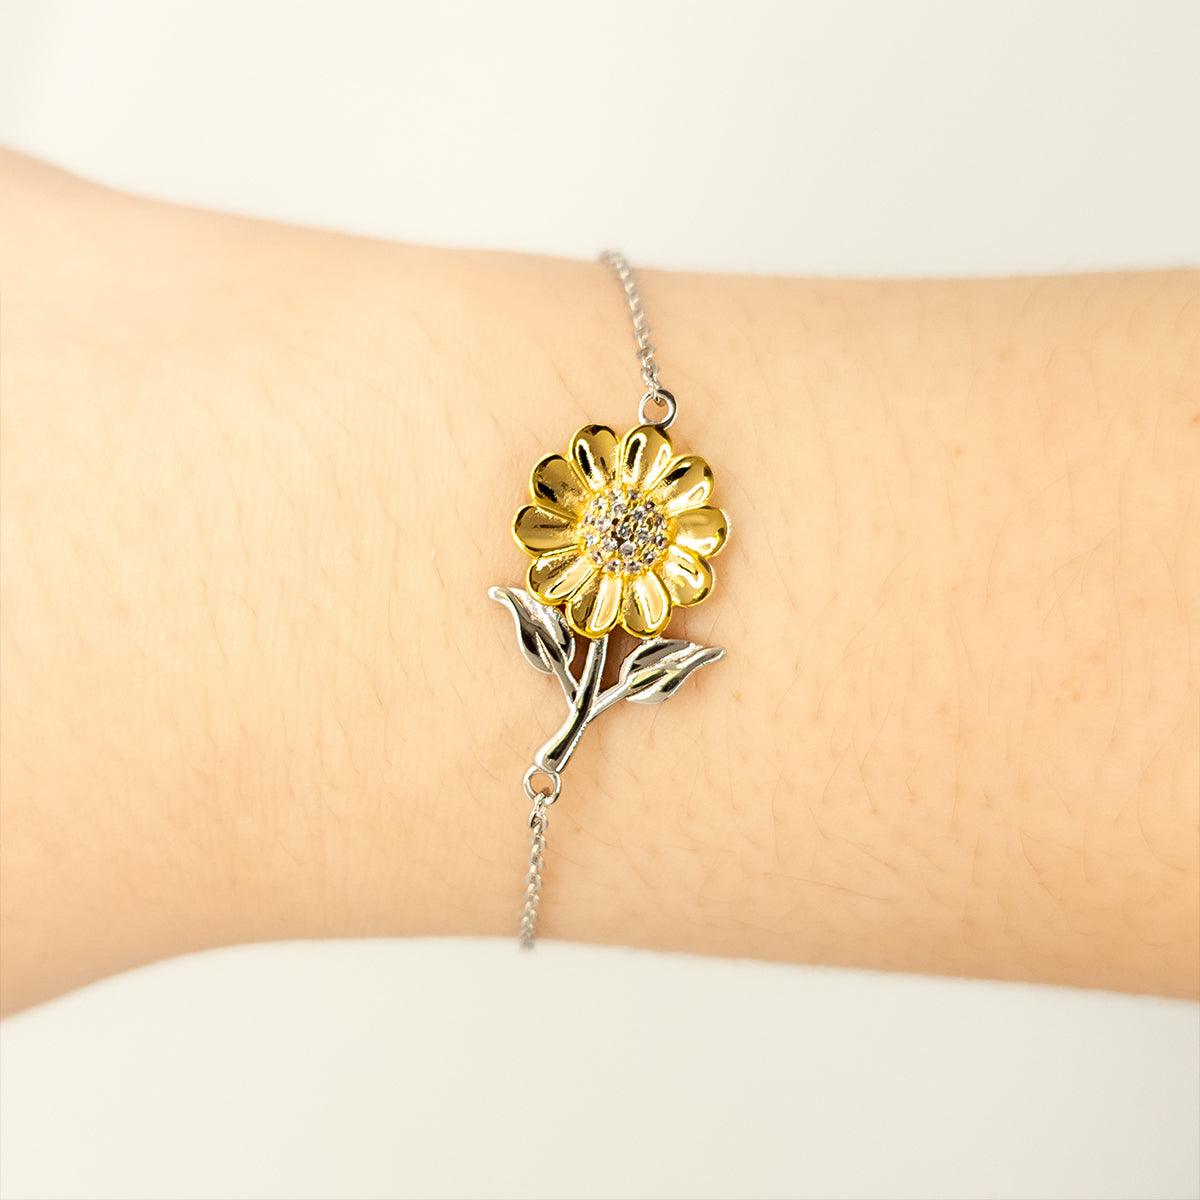 Remarkable Athletic Trainer Gifts, Your dedication and hard work, Inspirational Birthday Christmas Unique Sunflower Bracelet For Athletic Trainer, Coworkers, Men, Women, Friends - Mallard Moon Gift Shop